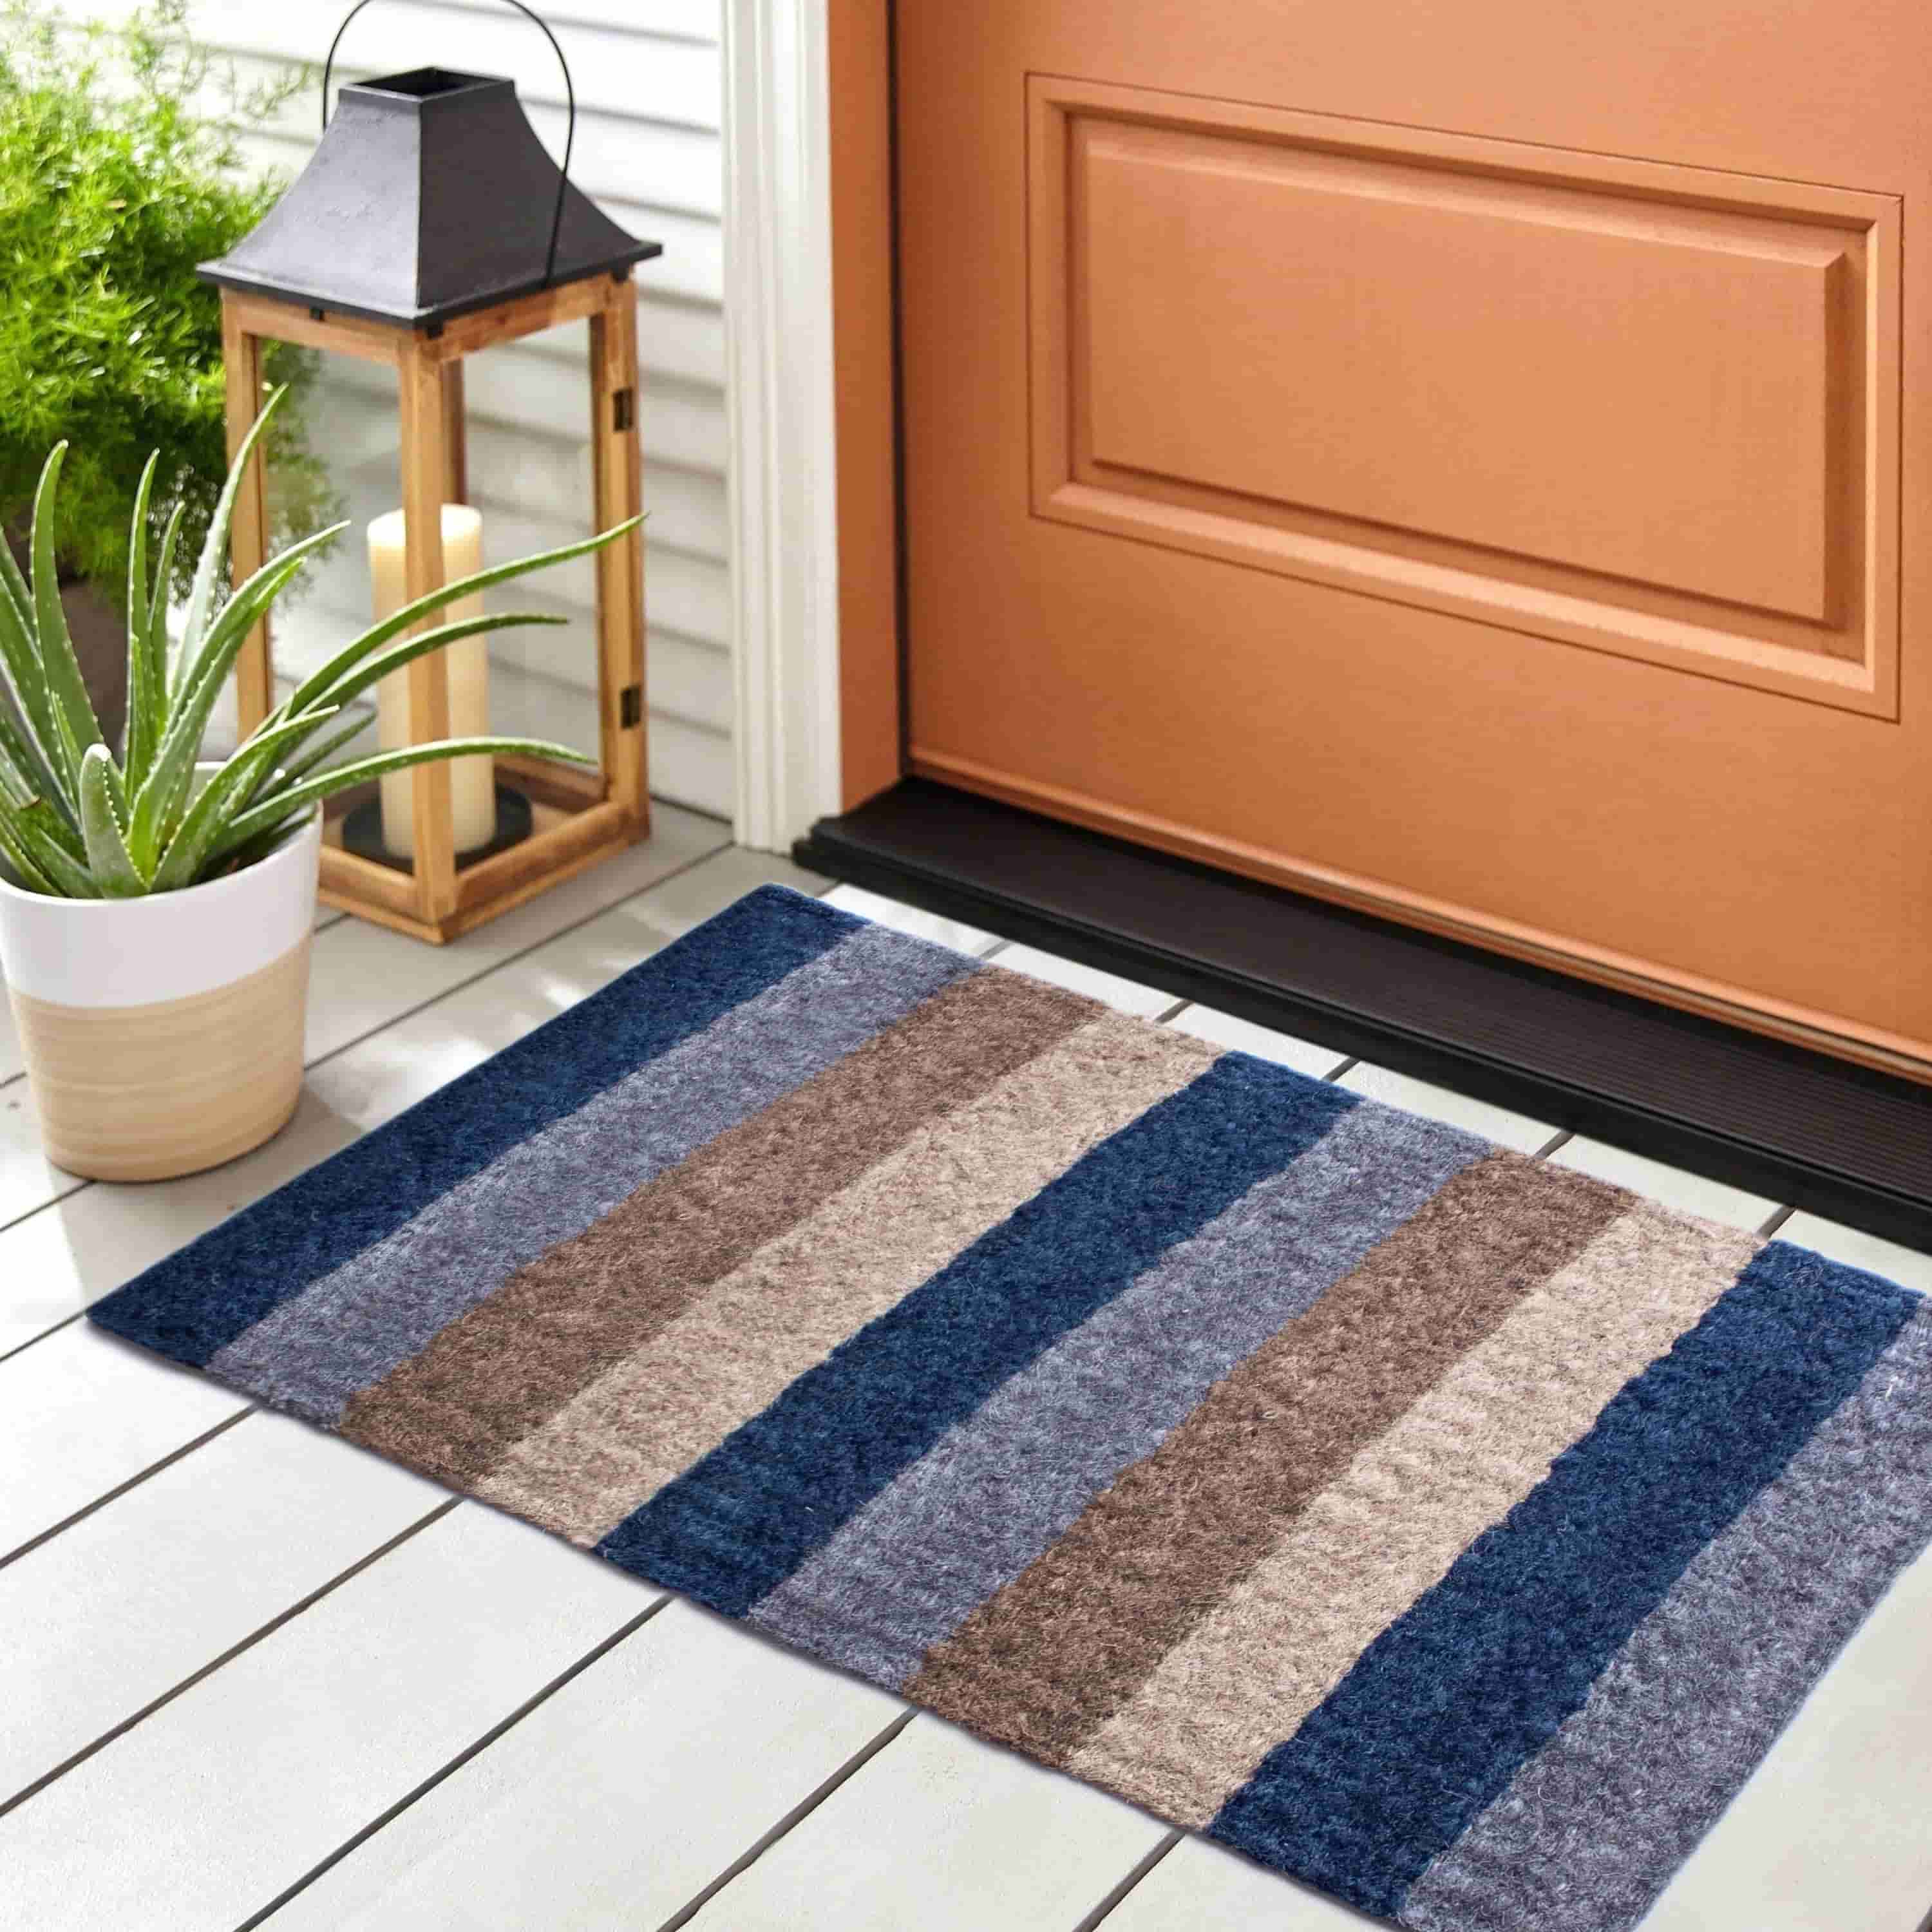 What is the best material for an Entryway Rug?